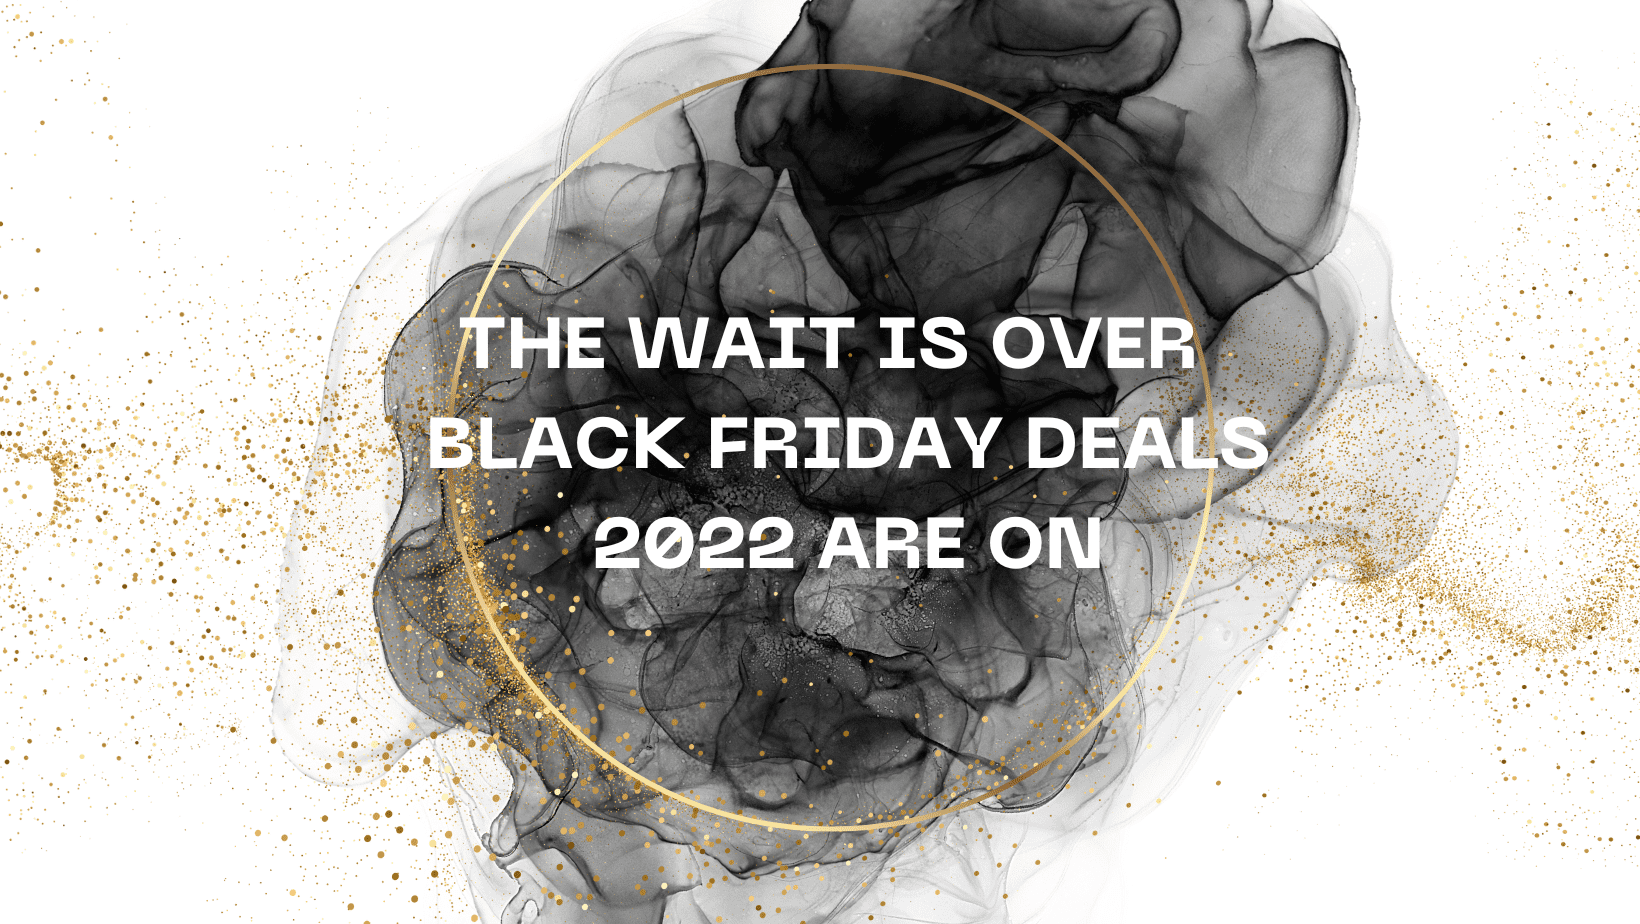 The Wait is OVER – Black Friday Deals 2022 are On